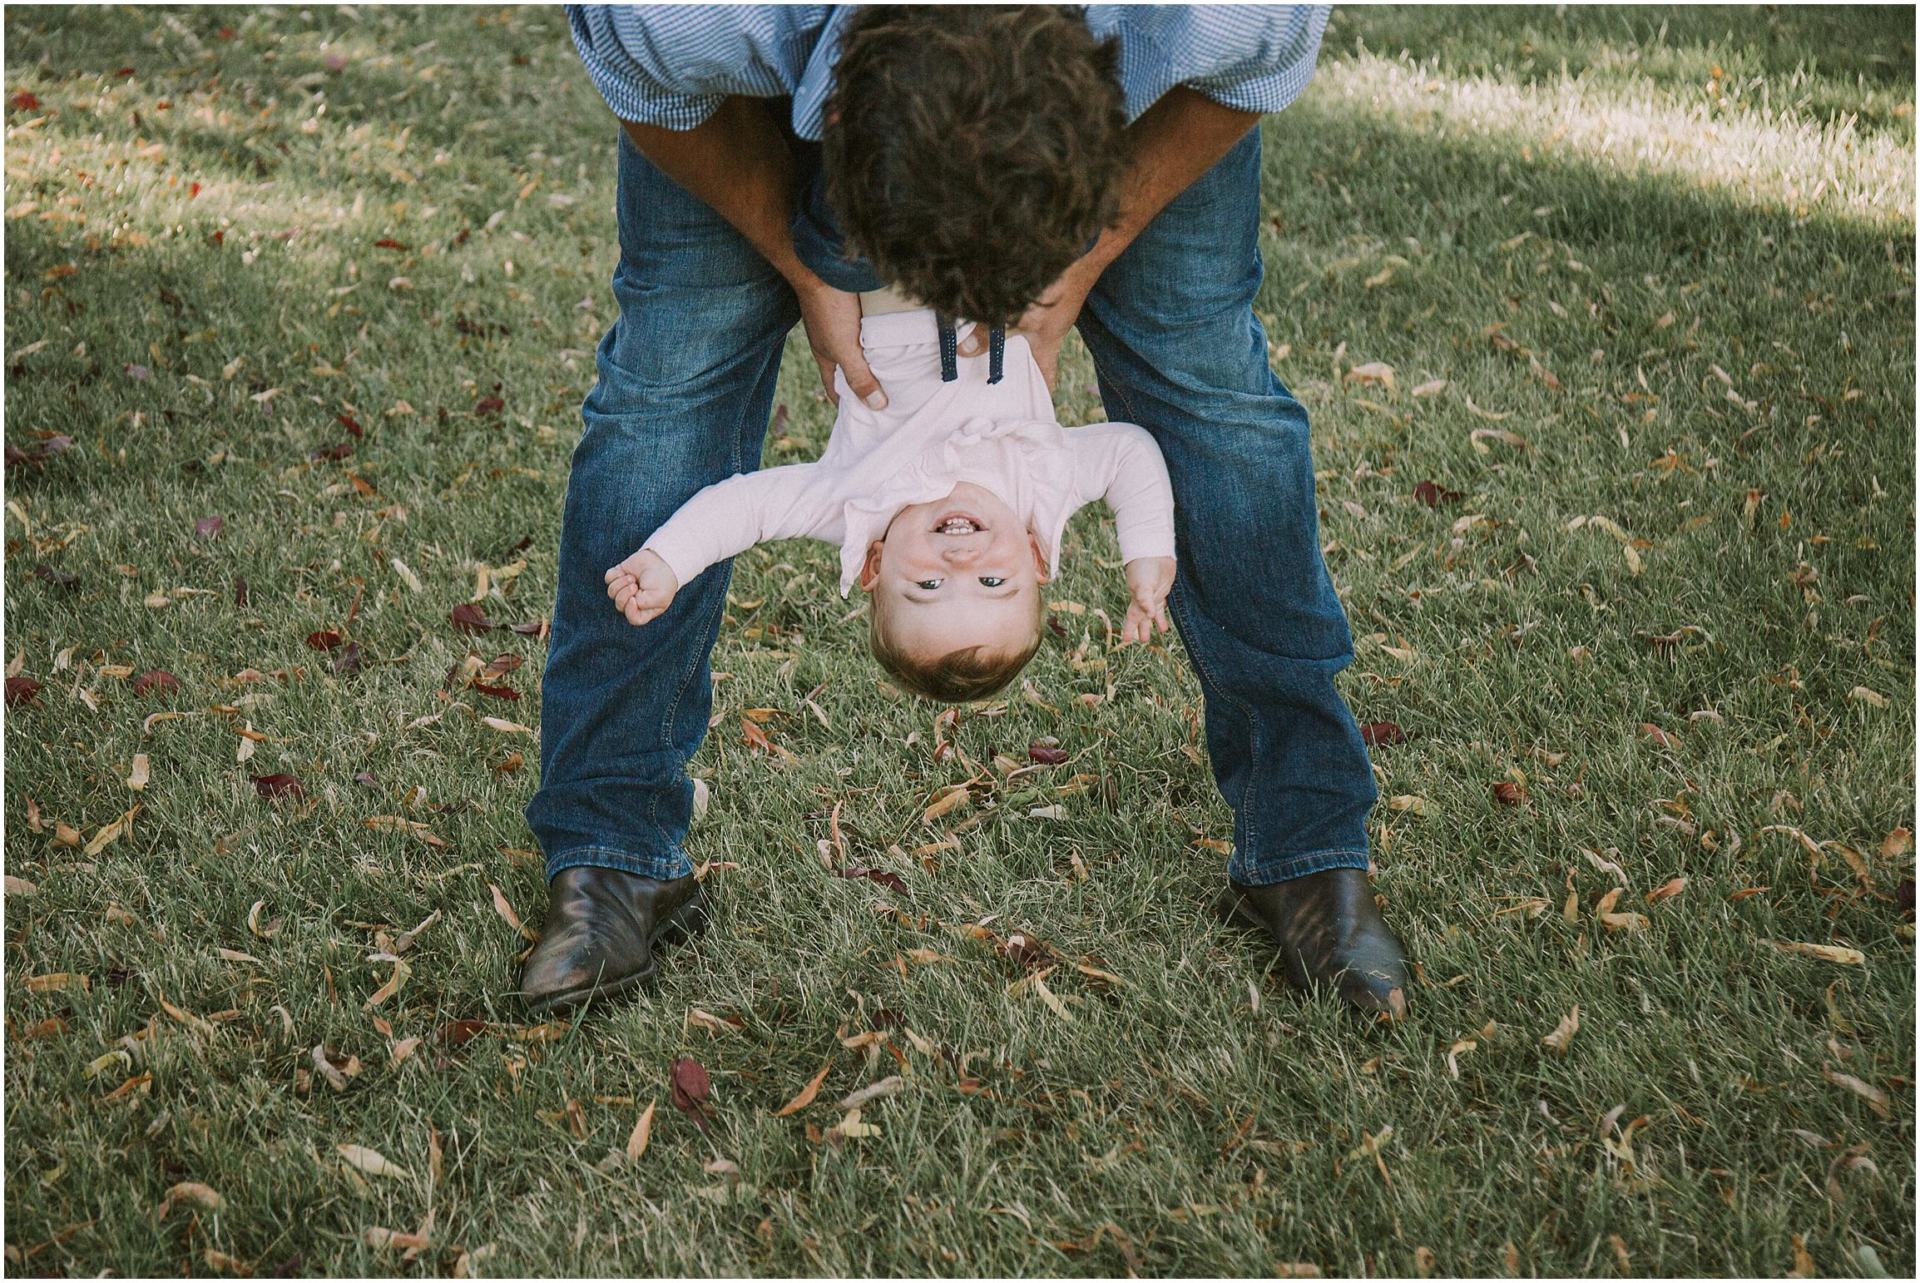 Charlotte Kiri Photography - Family Photography of a father dipping his child upside down playfully in a garden in Wanaka, New Zealand.